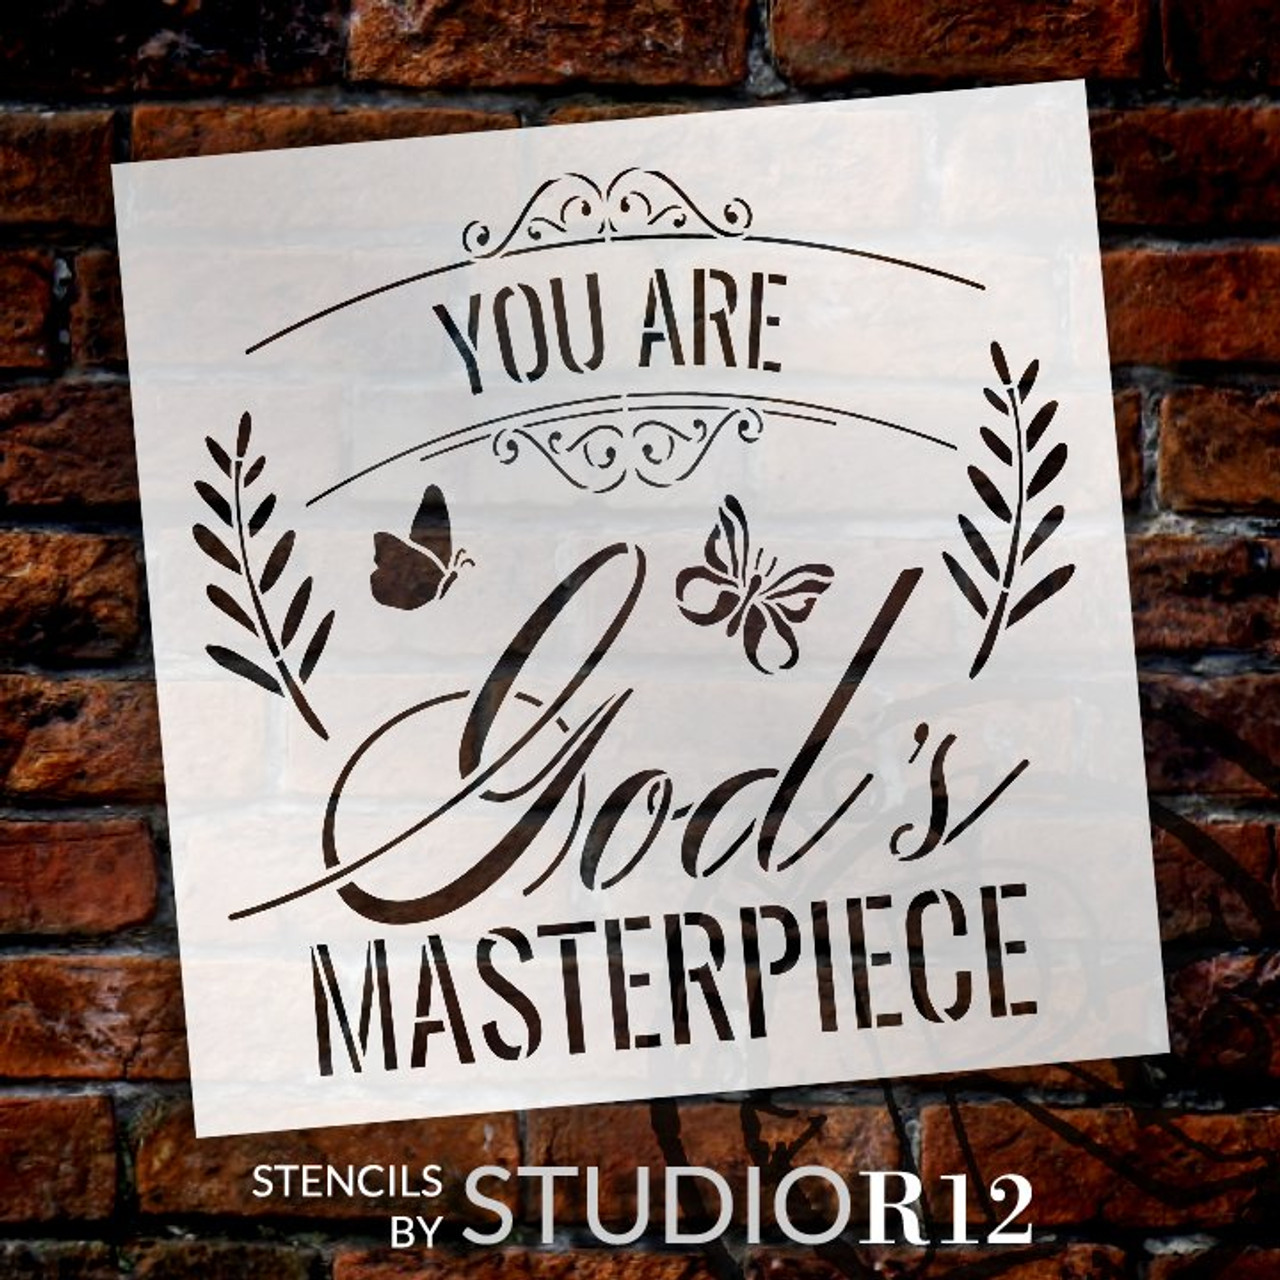 You are God's Masterpiece Stencil by StudioR12 | DIY Inspirational Quote Home Decor | Craft & Paint Faith Wood Signs | Select Size